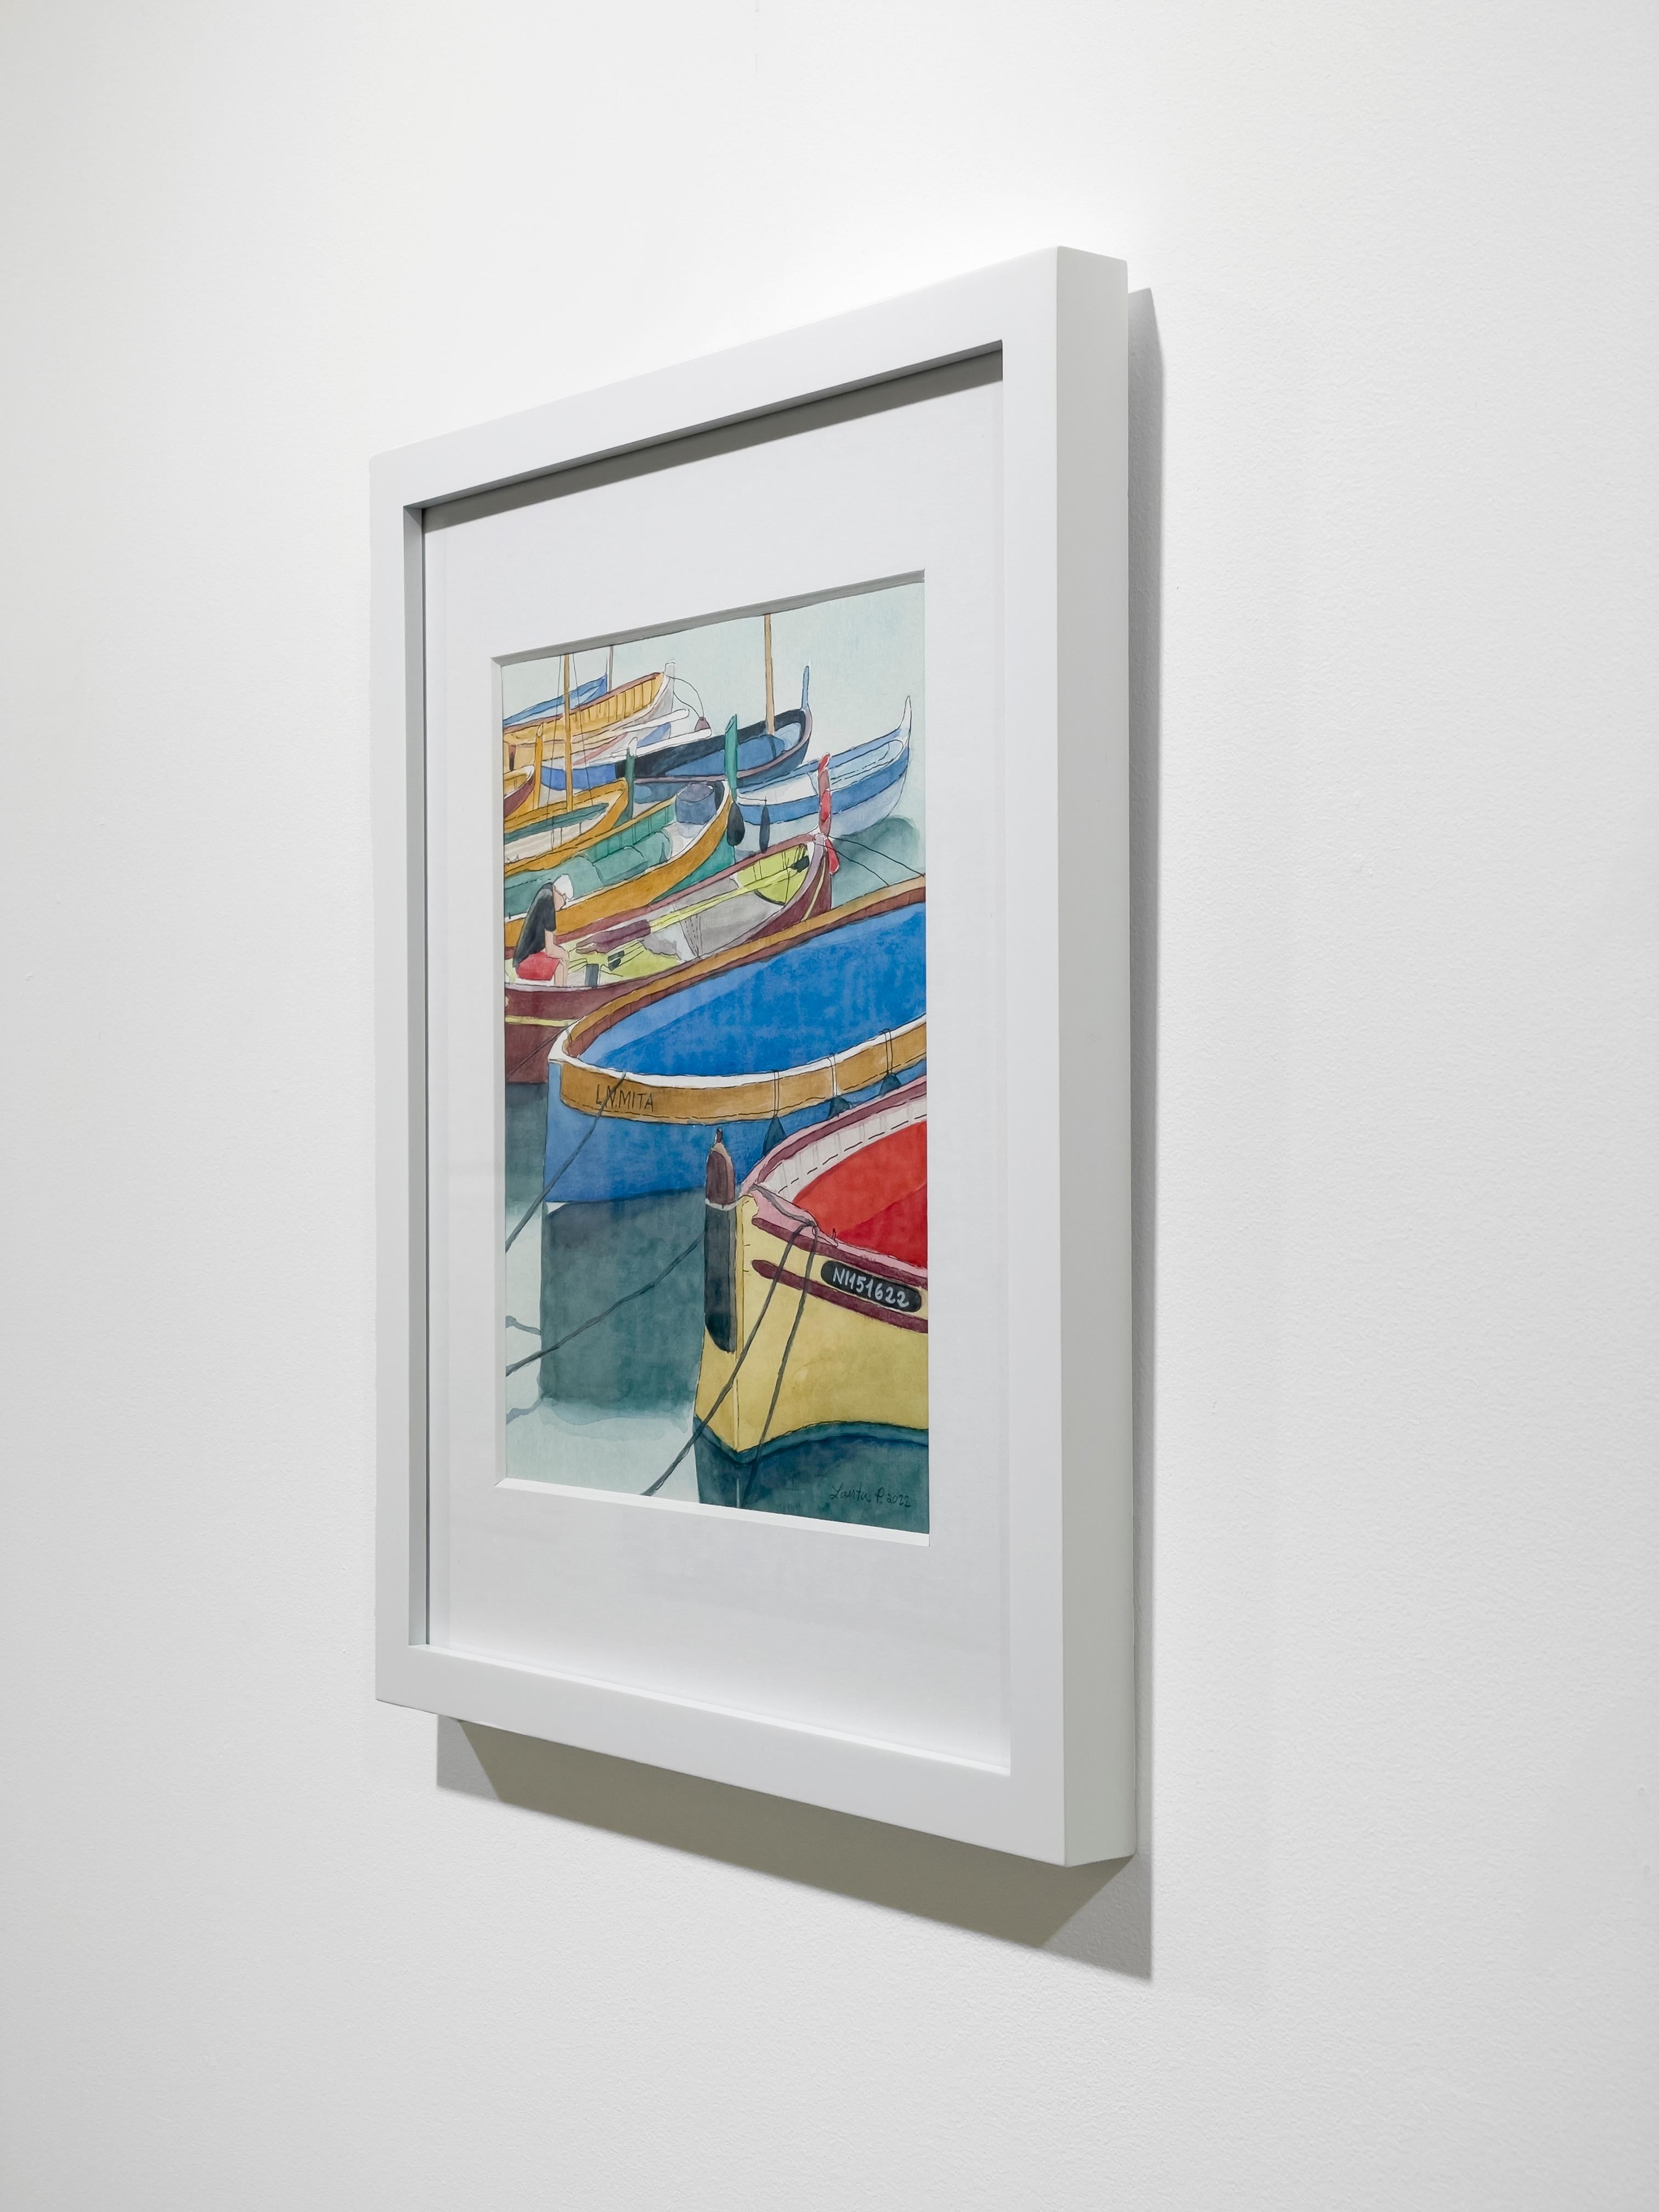 This original nautical illustration by Laerta Premto is made with watercolor and ink on paper. It captures small boats of varying colors docked together in a marina, with one sailer sitting in a maroon-colored one. The painting itself is 10